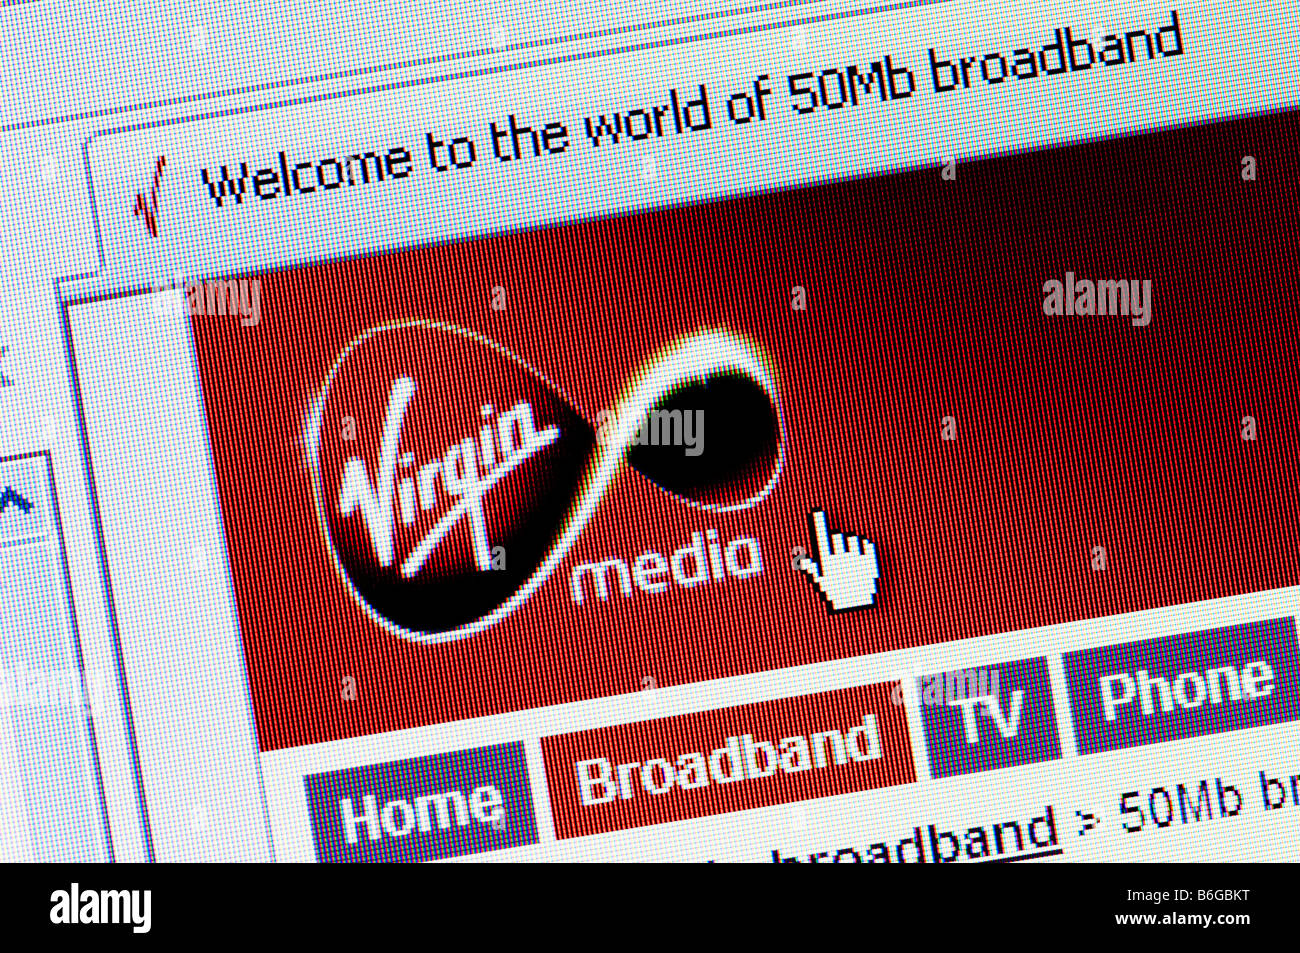 Macro screenshot of Virgin Broadband website Virgin Media launched its new 50mb service in December 2008 Editorial use only Stock Photo